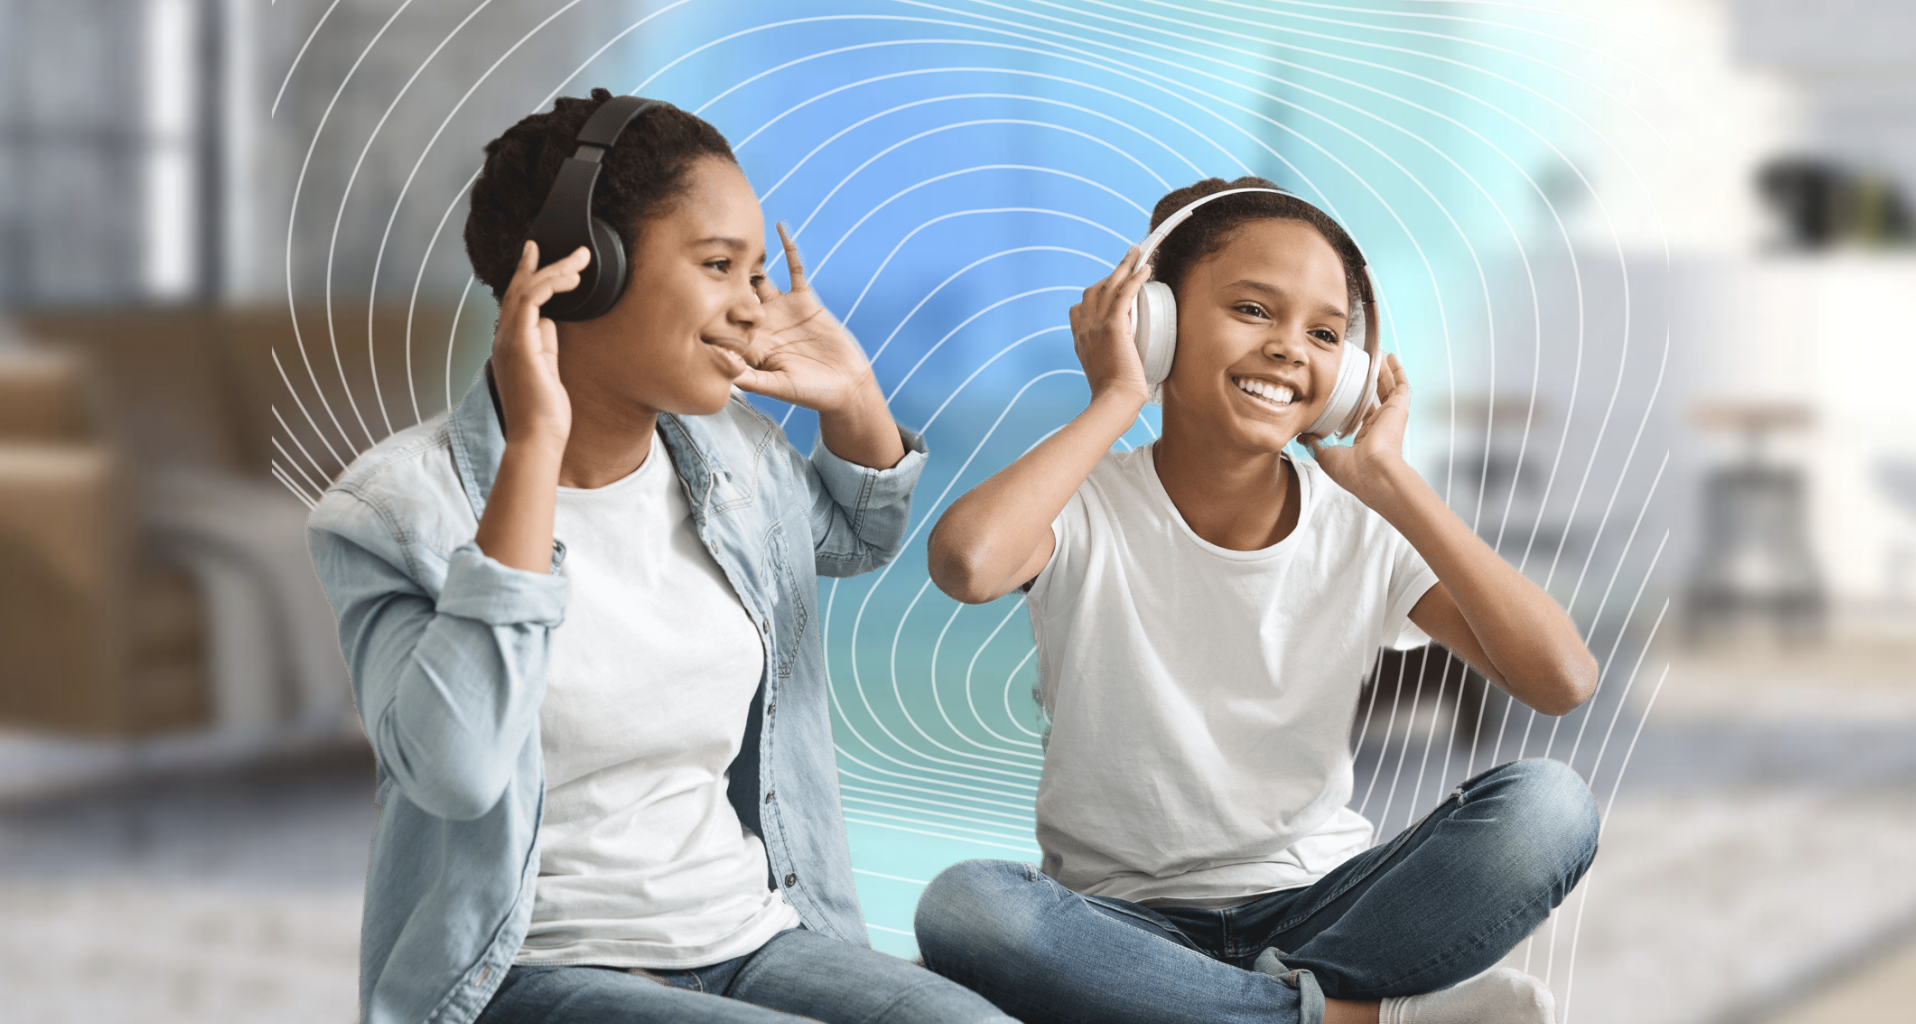 Auracast Bluetooth shared by two children, on over-ear wireless headphones